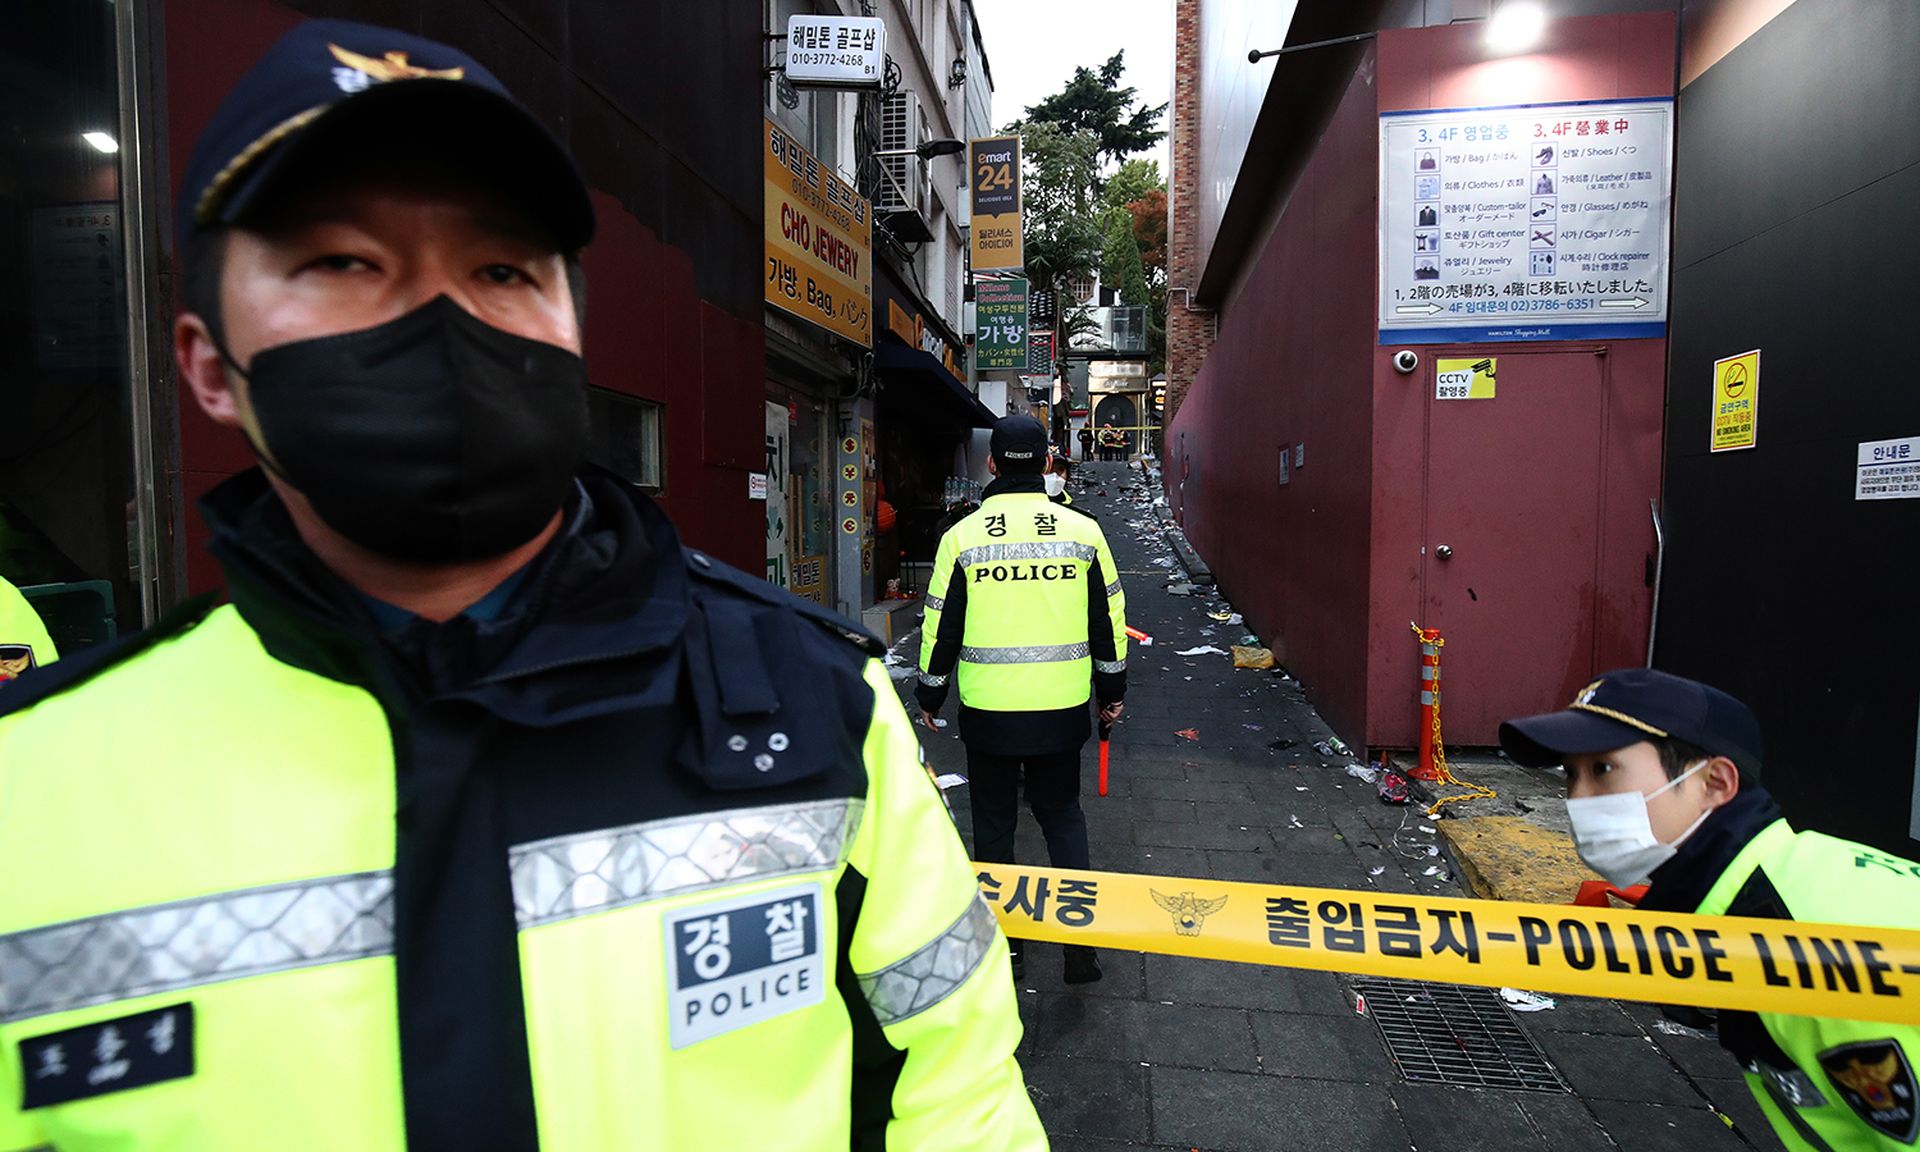 A South Korean policeman stands in front of police tape